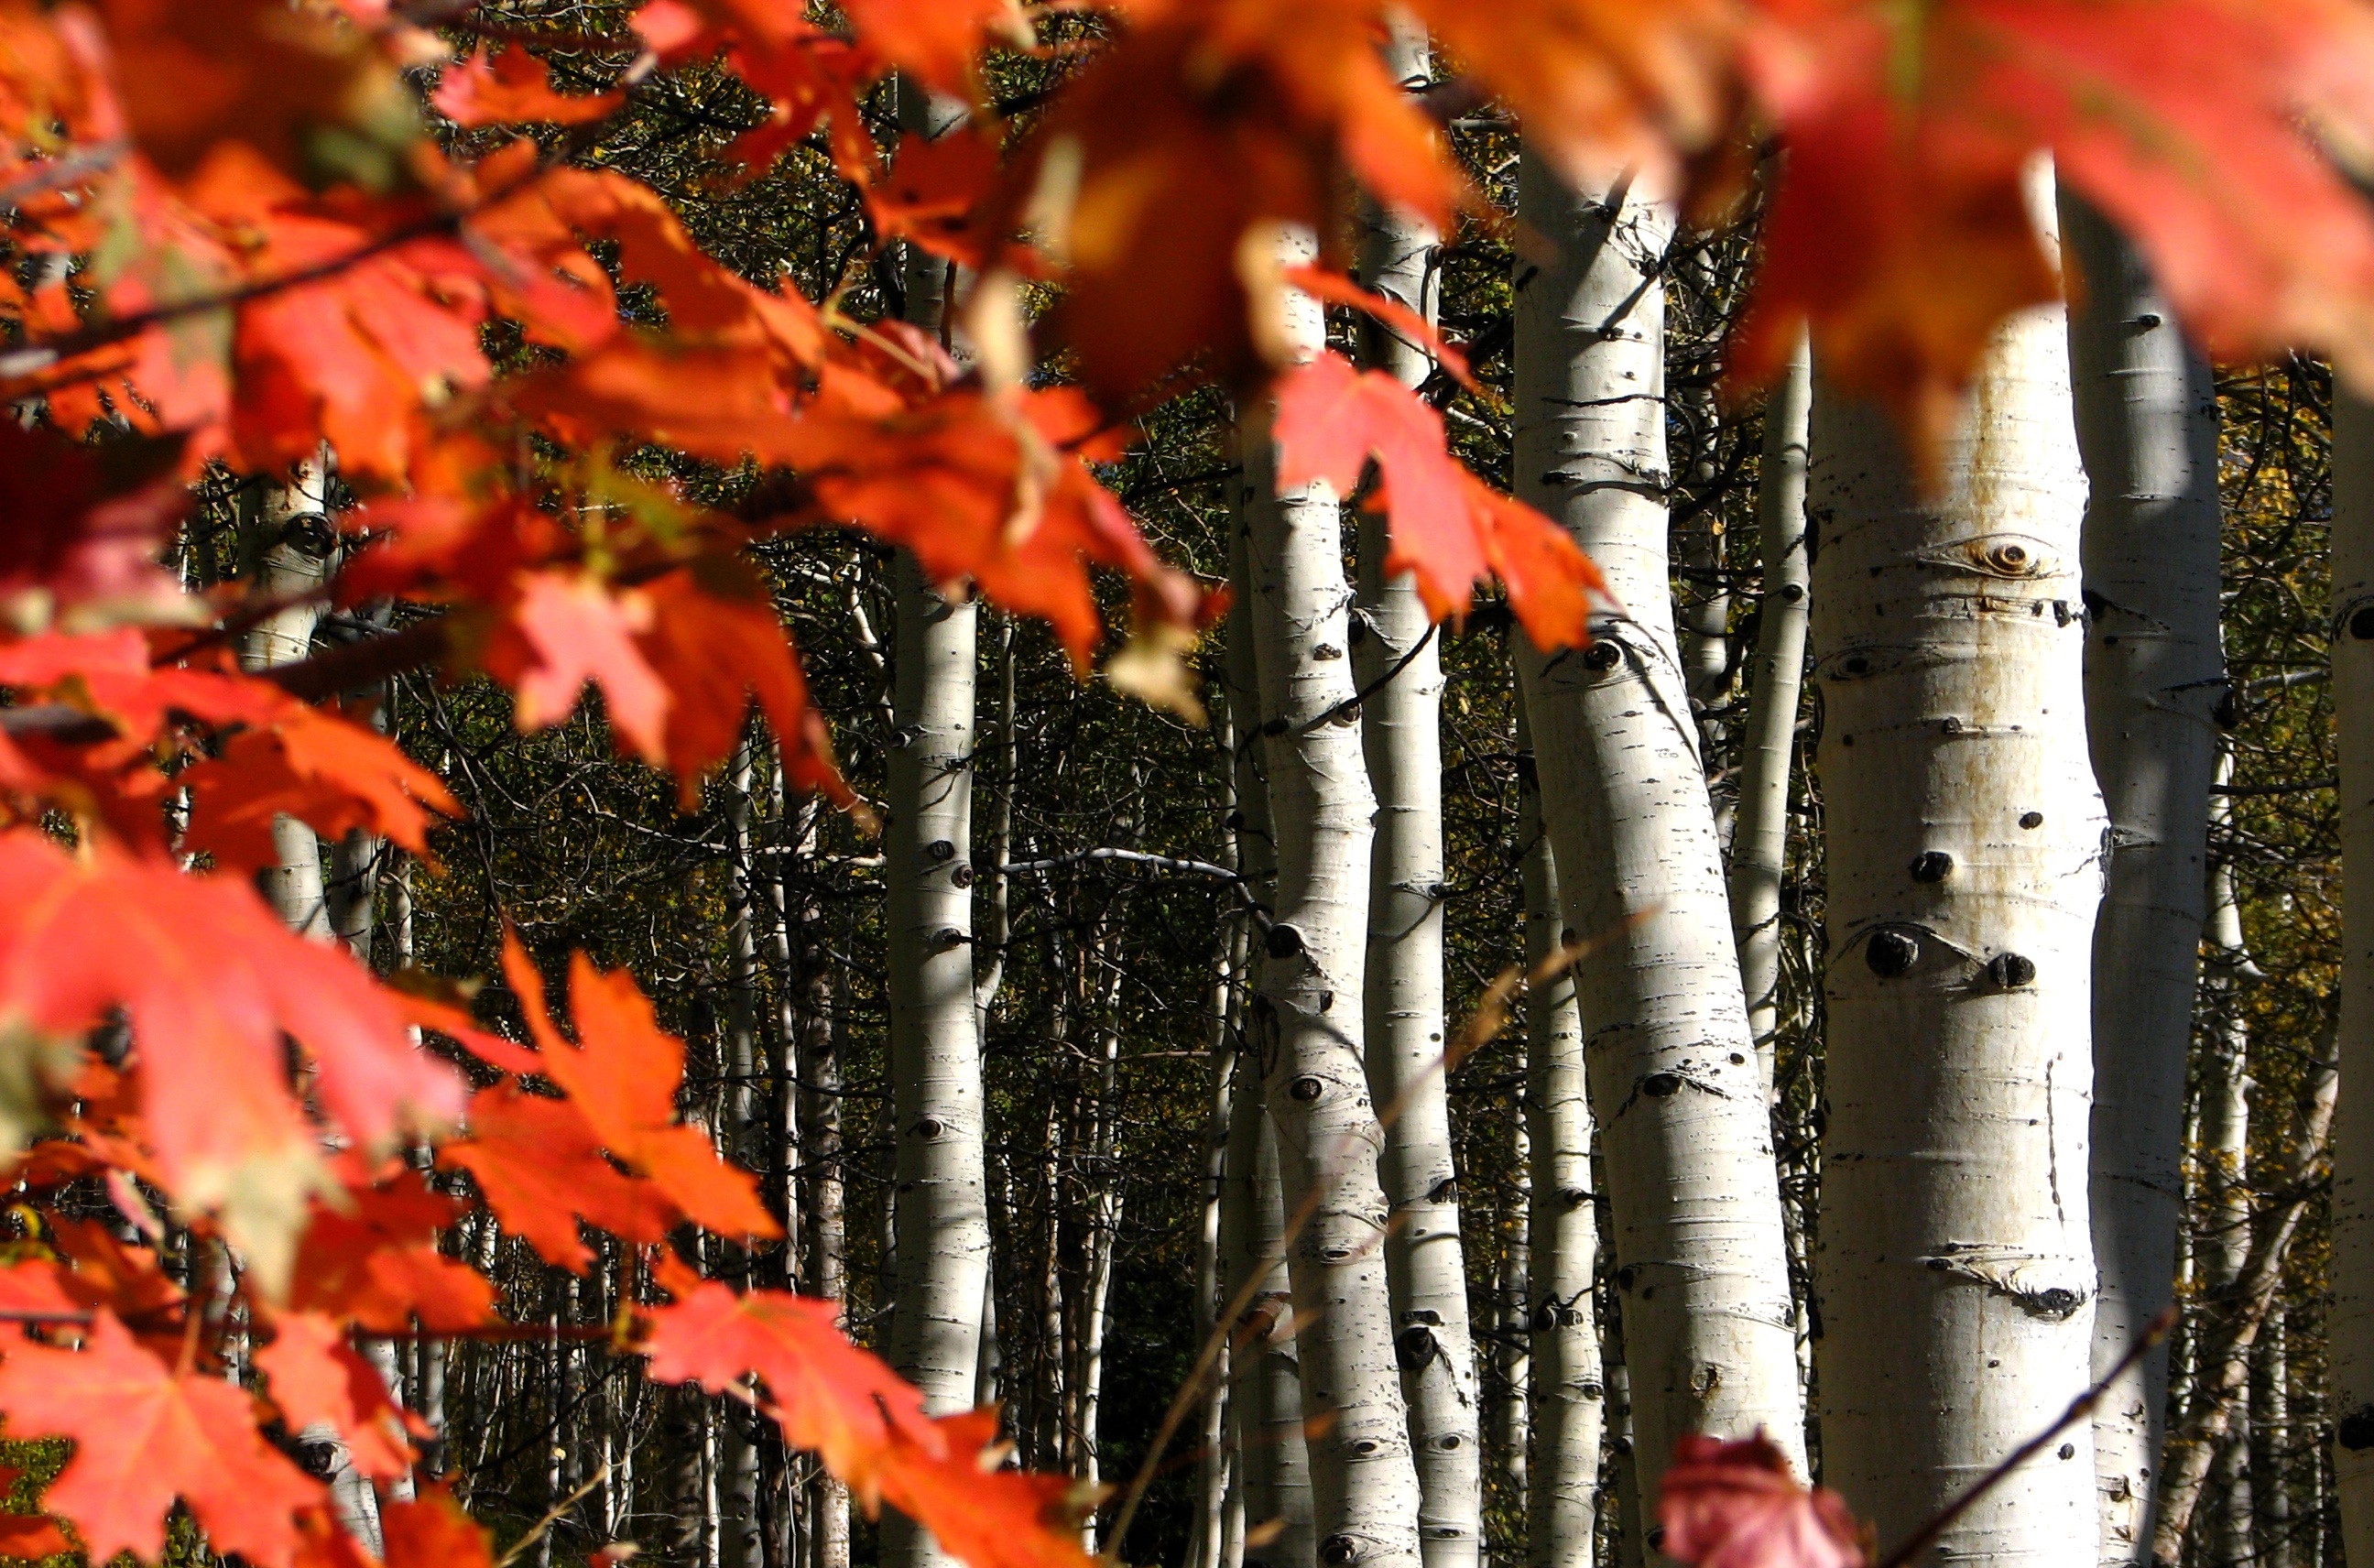 General 2592x1712 trees birch fall red leaves tree trunk plants outdoors